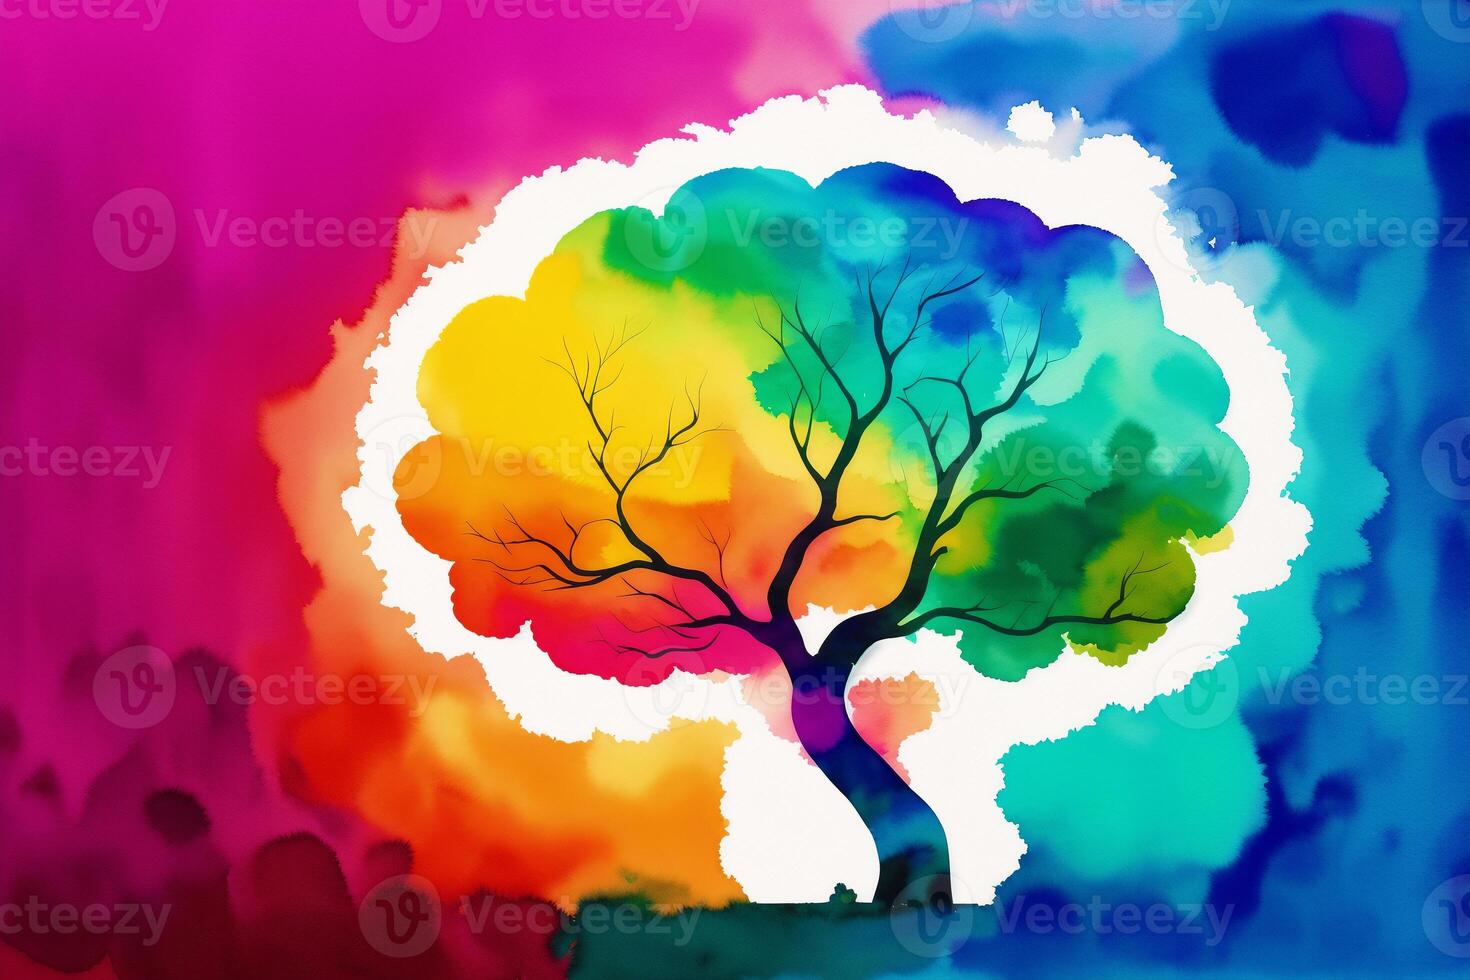 A watercolor painting of a tree with a rainbow on it. A colorful painting of a brain. Watercolor paint. Digital art, photo